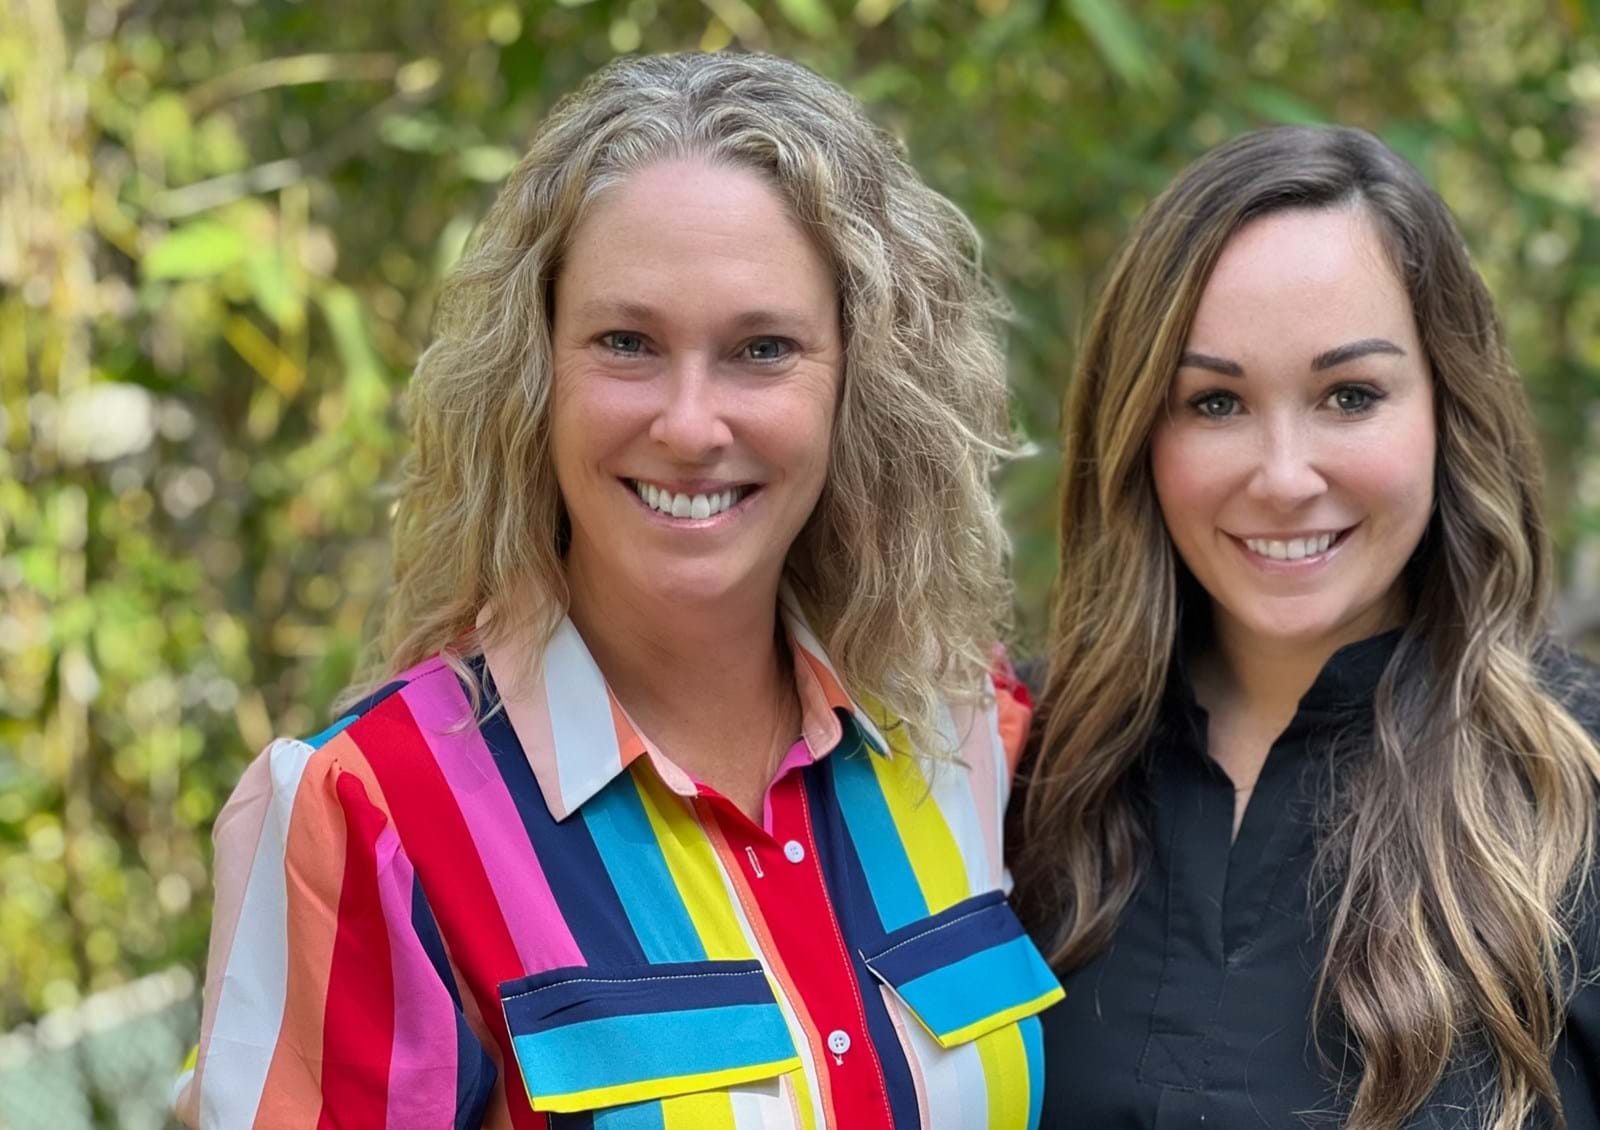 Magical Elves’ Co-CEO’s Jo Sharon & Casey Kriley feature in Entertainment Weekly’s ‘Gamechangers’ series.  